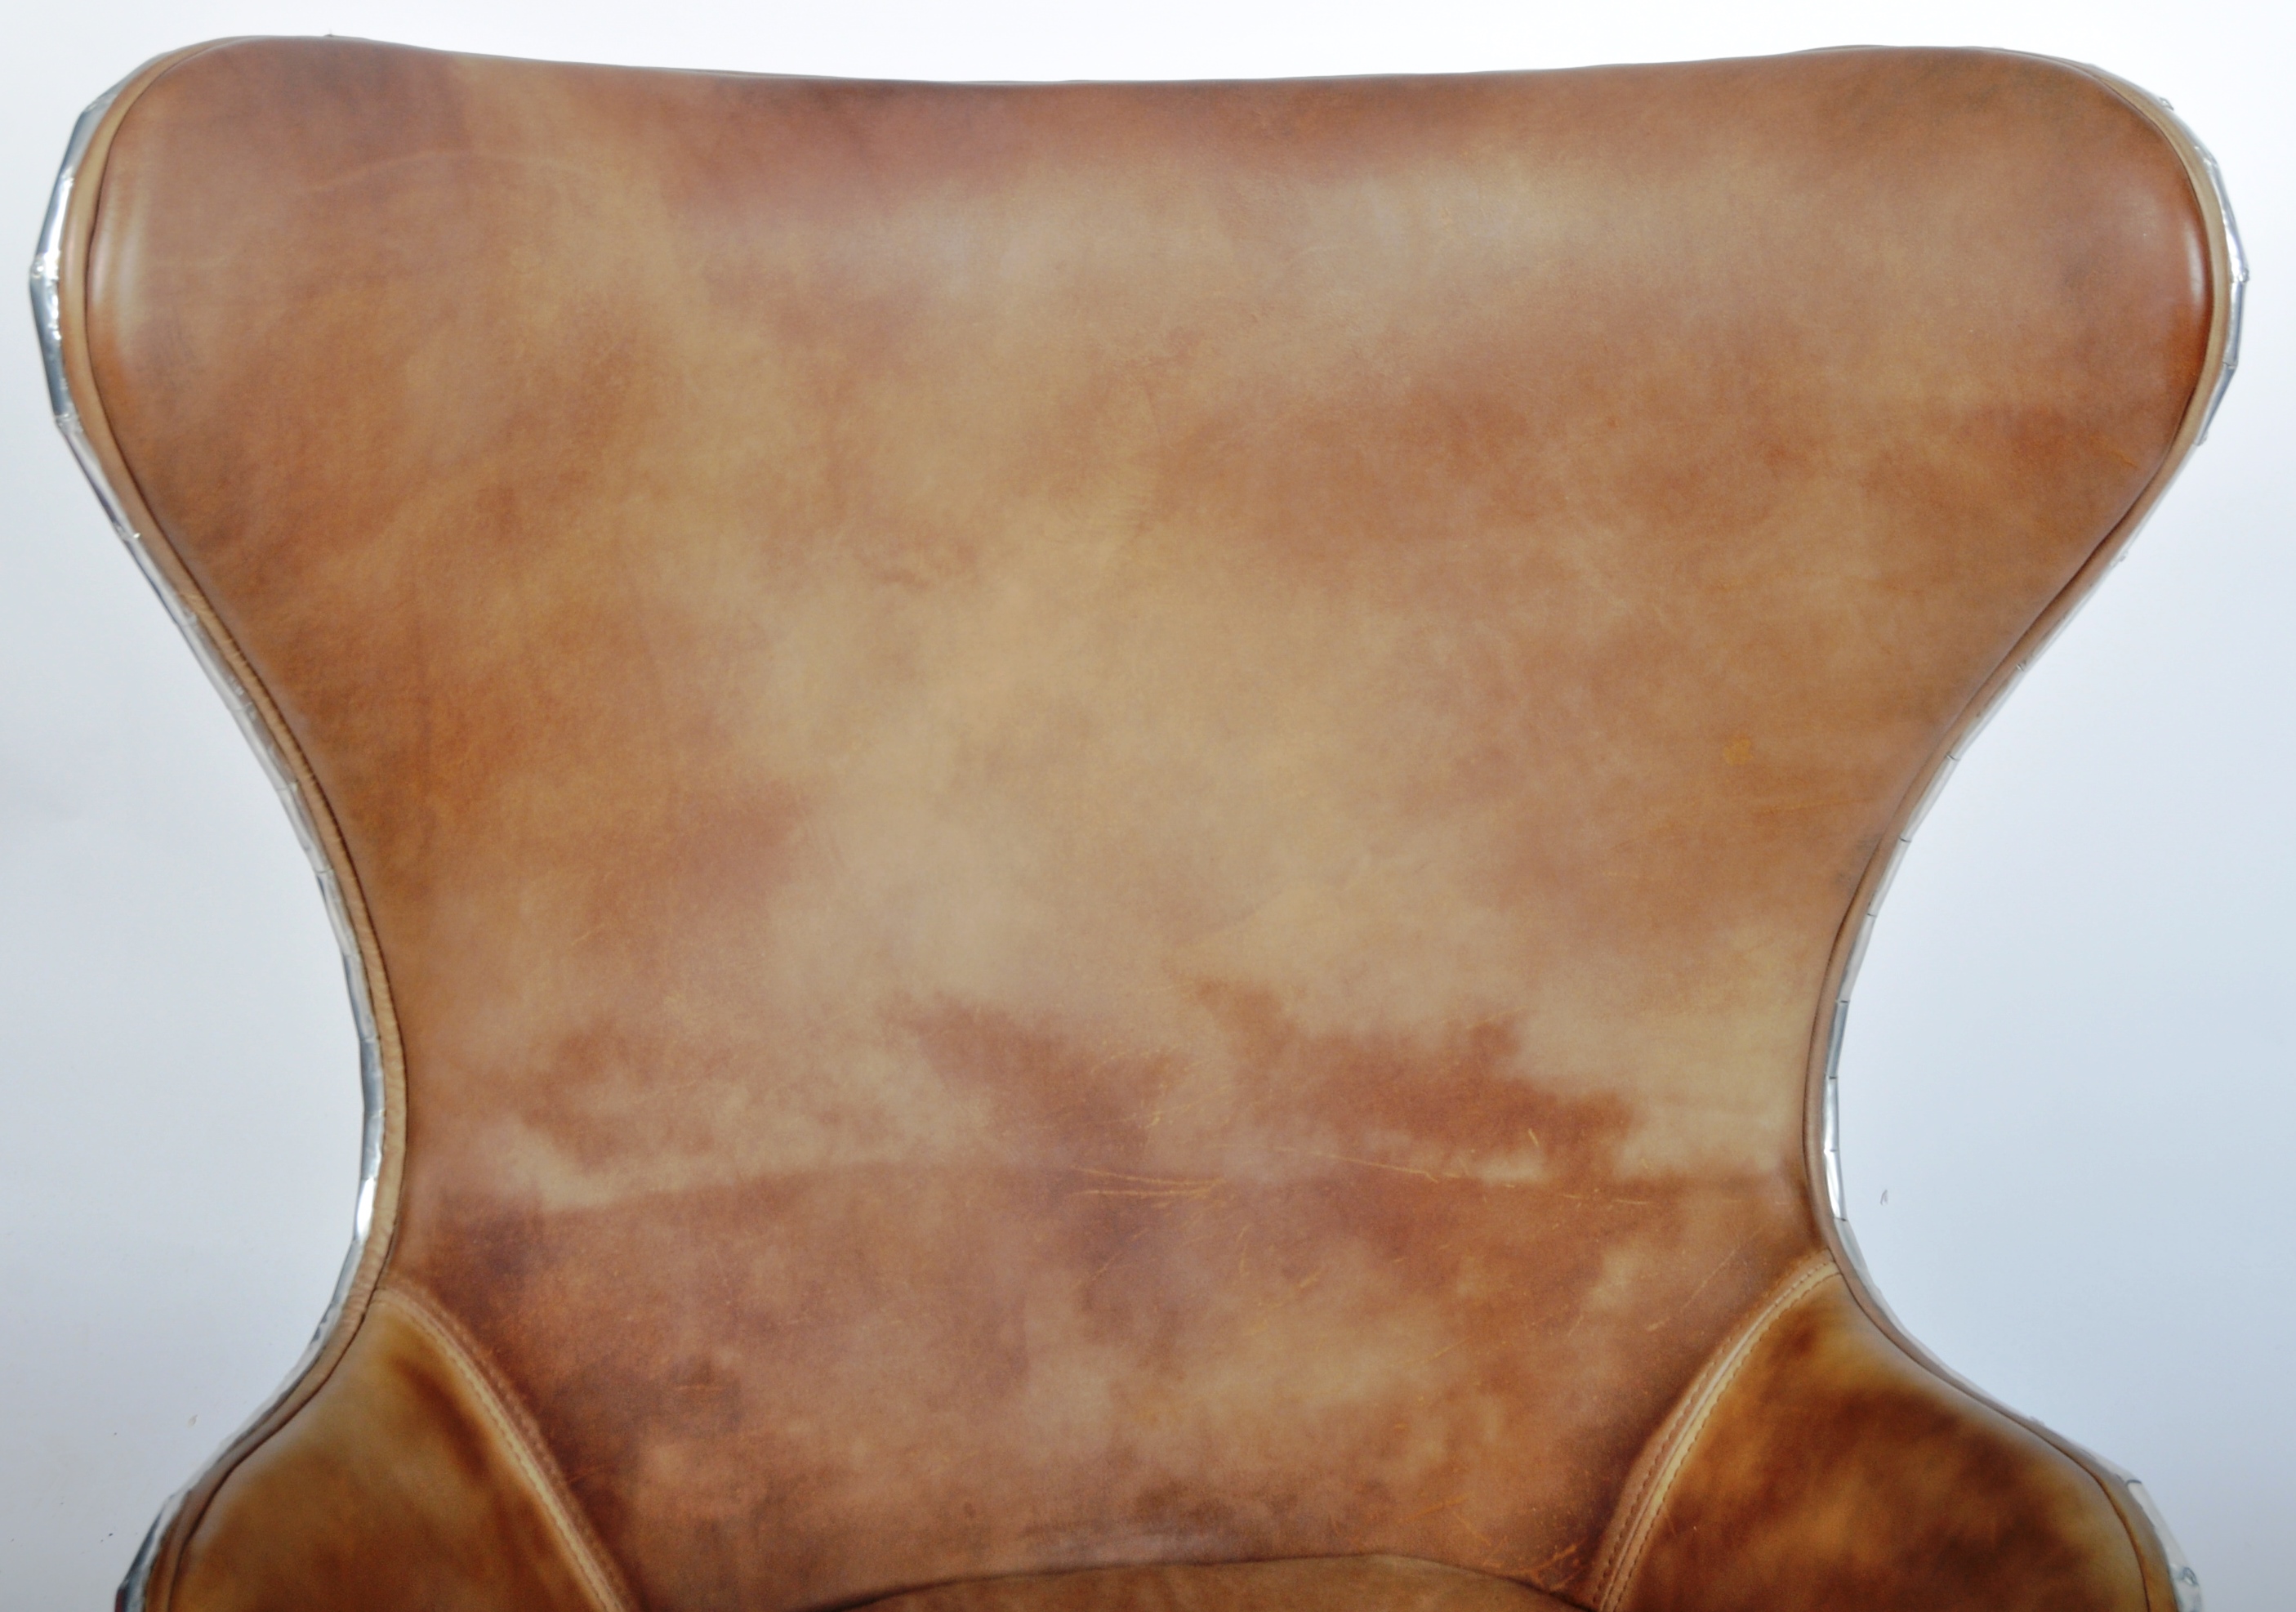 ANDREW MARTIN FURNITURE AVIATOR CHROME & LEATHER CHAIR - Image 3 of 9